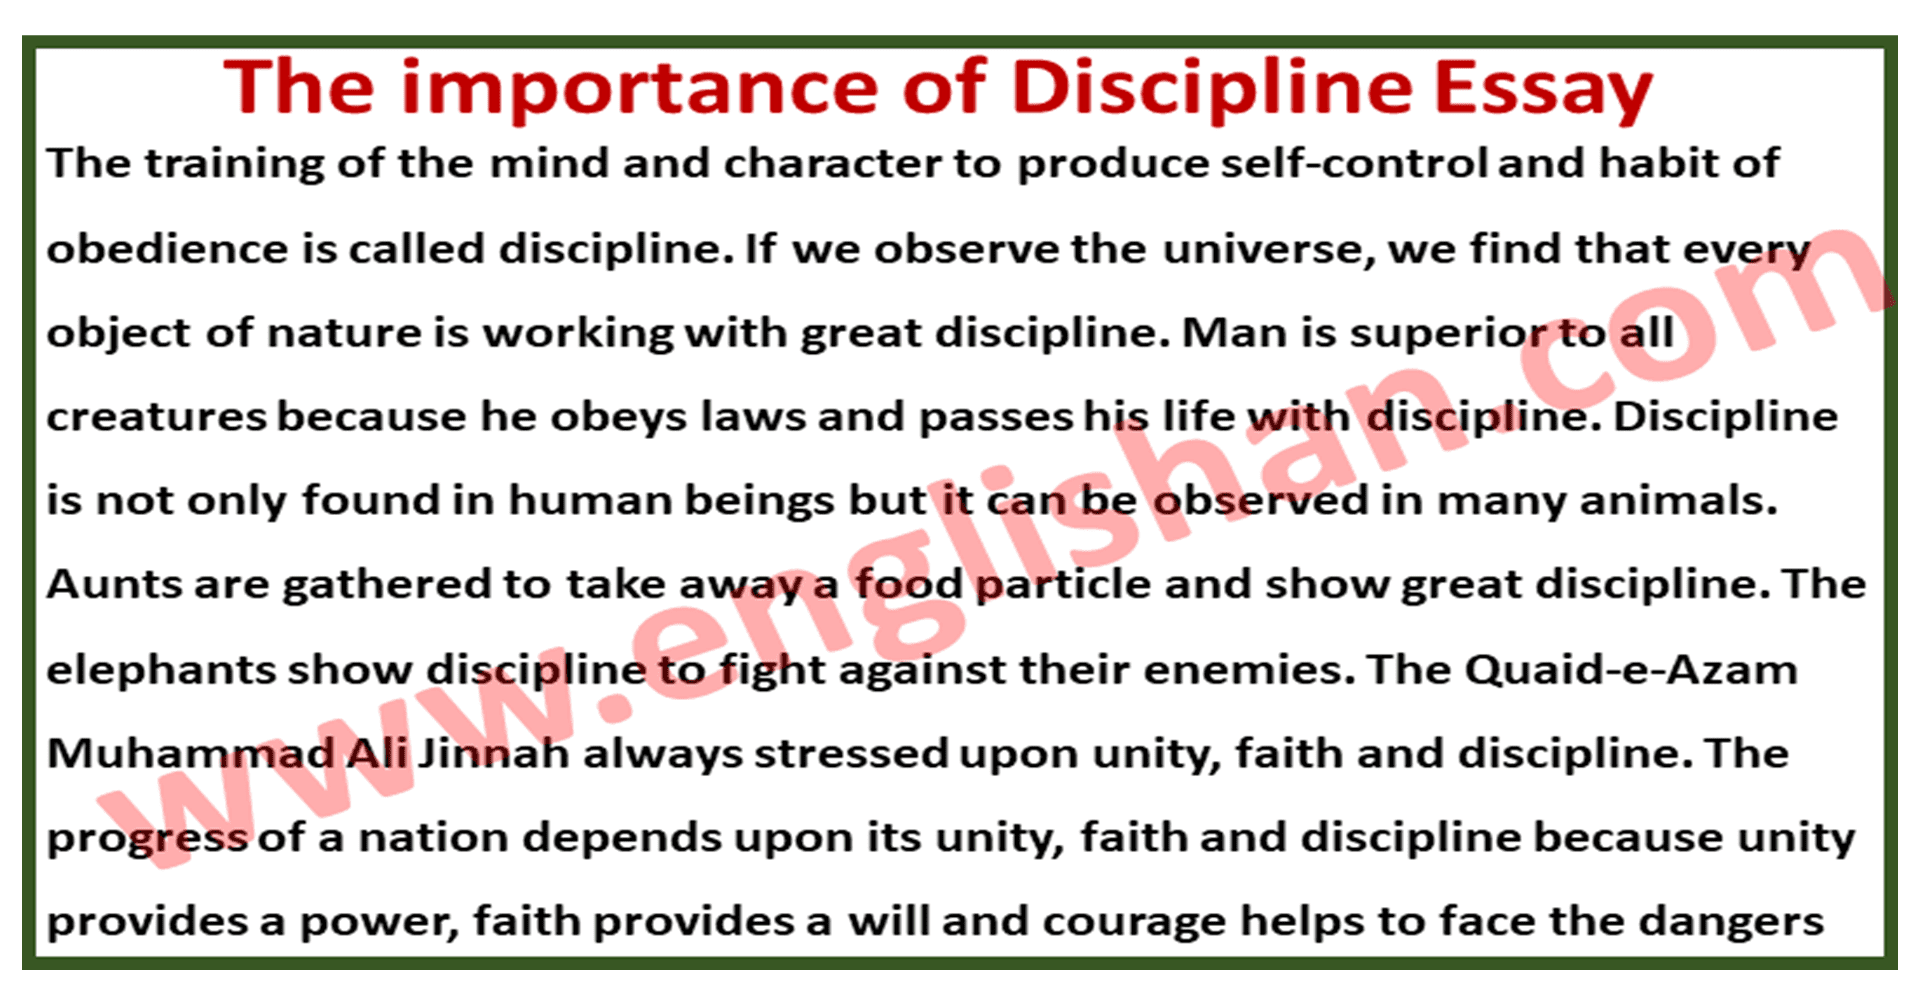 article on importance of discipline